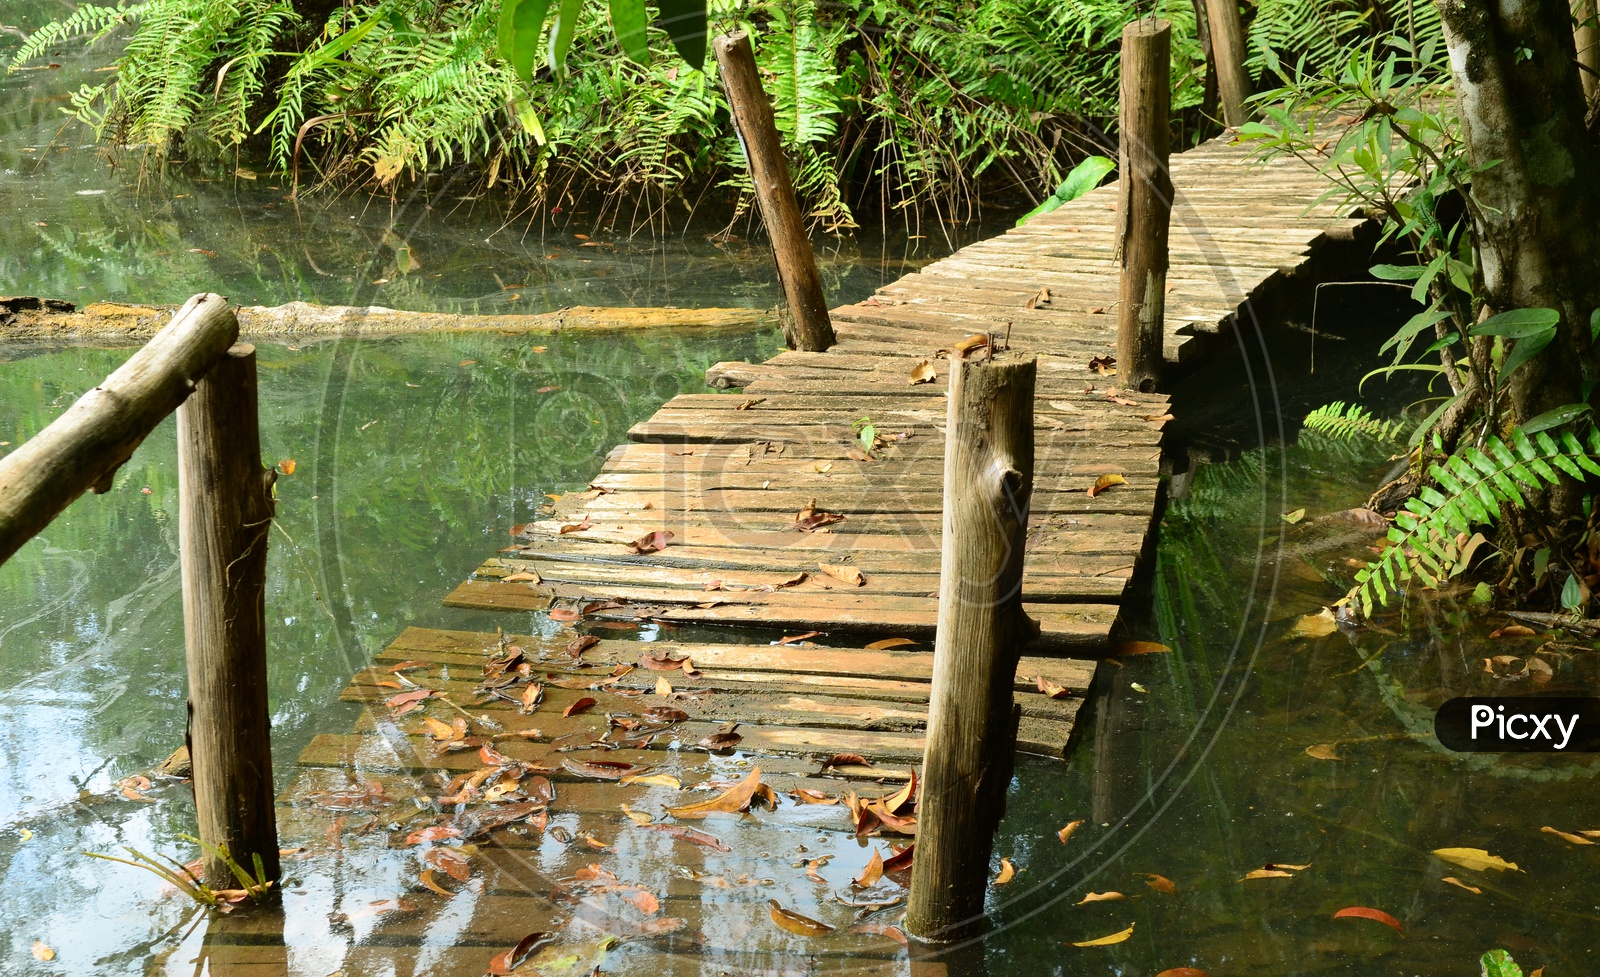 Boardwalk Through The Thai Forest along the pond